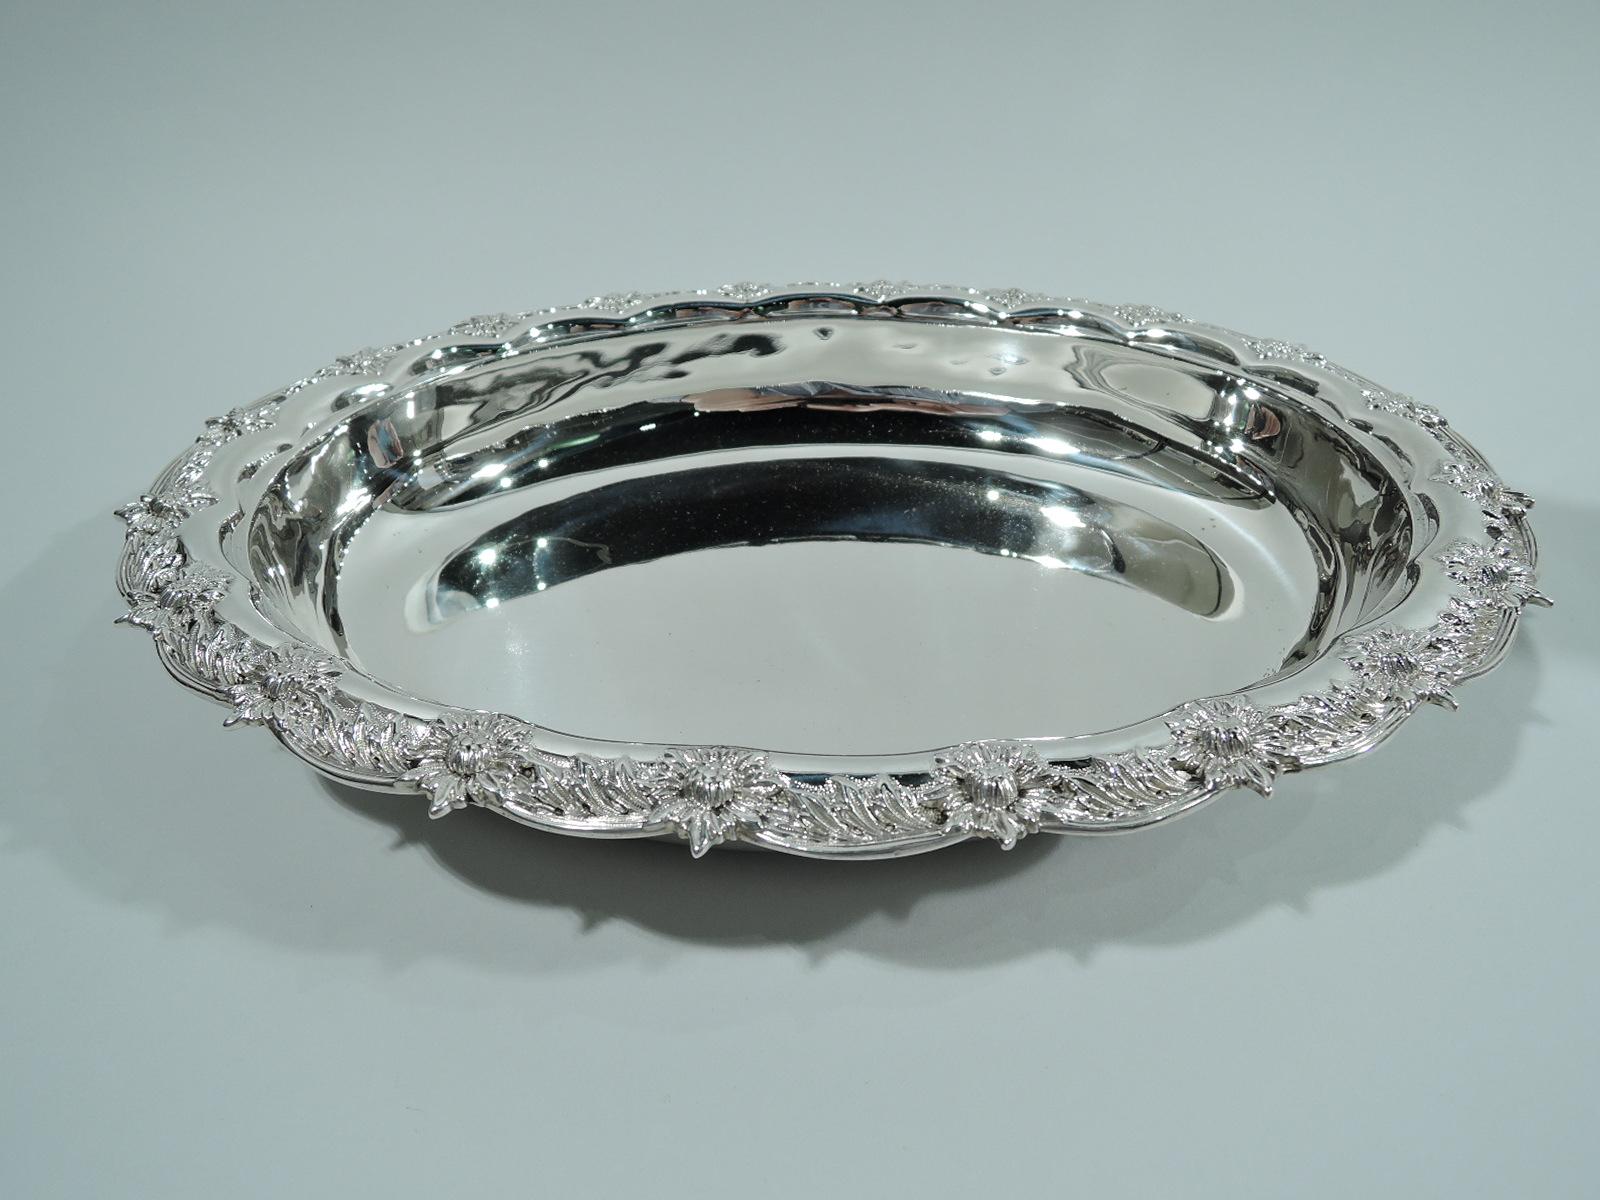 Chrysanthemum sterling silver serving bowl. Made by Tiffany & Co. in New York. Oval well with tapering sides, and scalloped rim with applied leaf-and-flower head border. A controlled arrangement in the historic Japonesque pattern. Fully marked